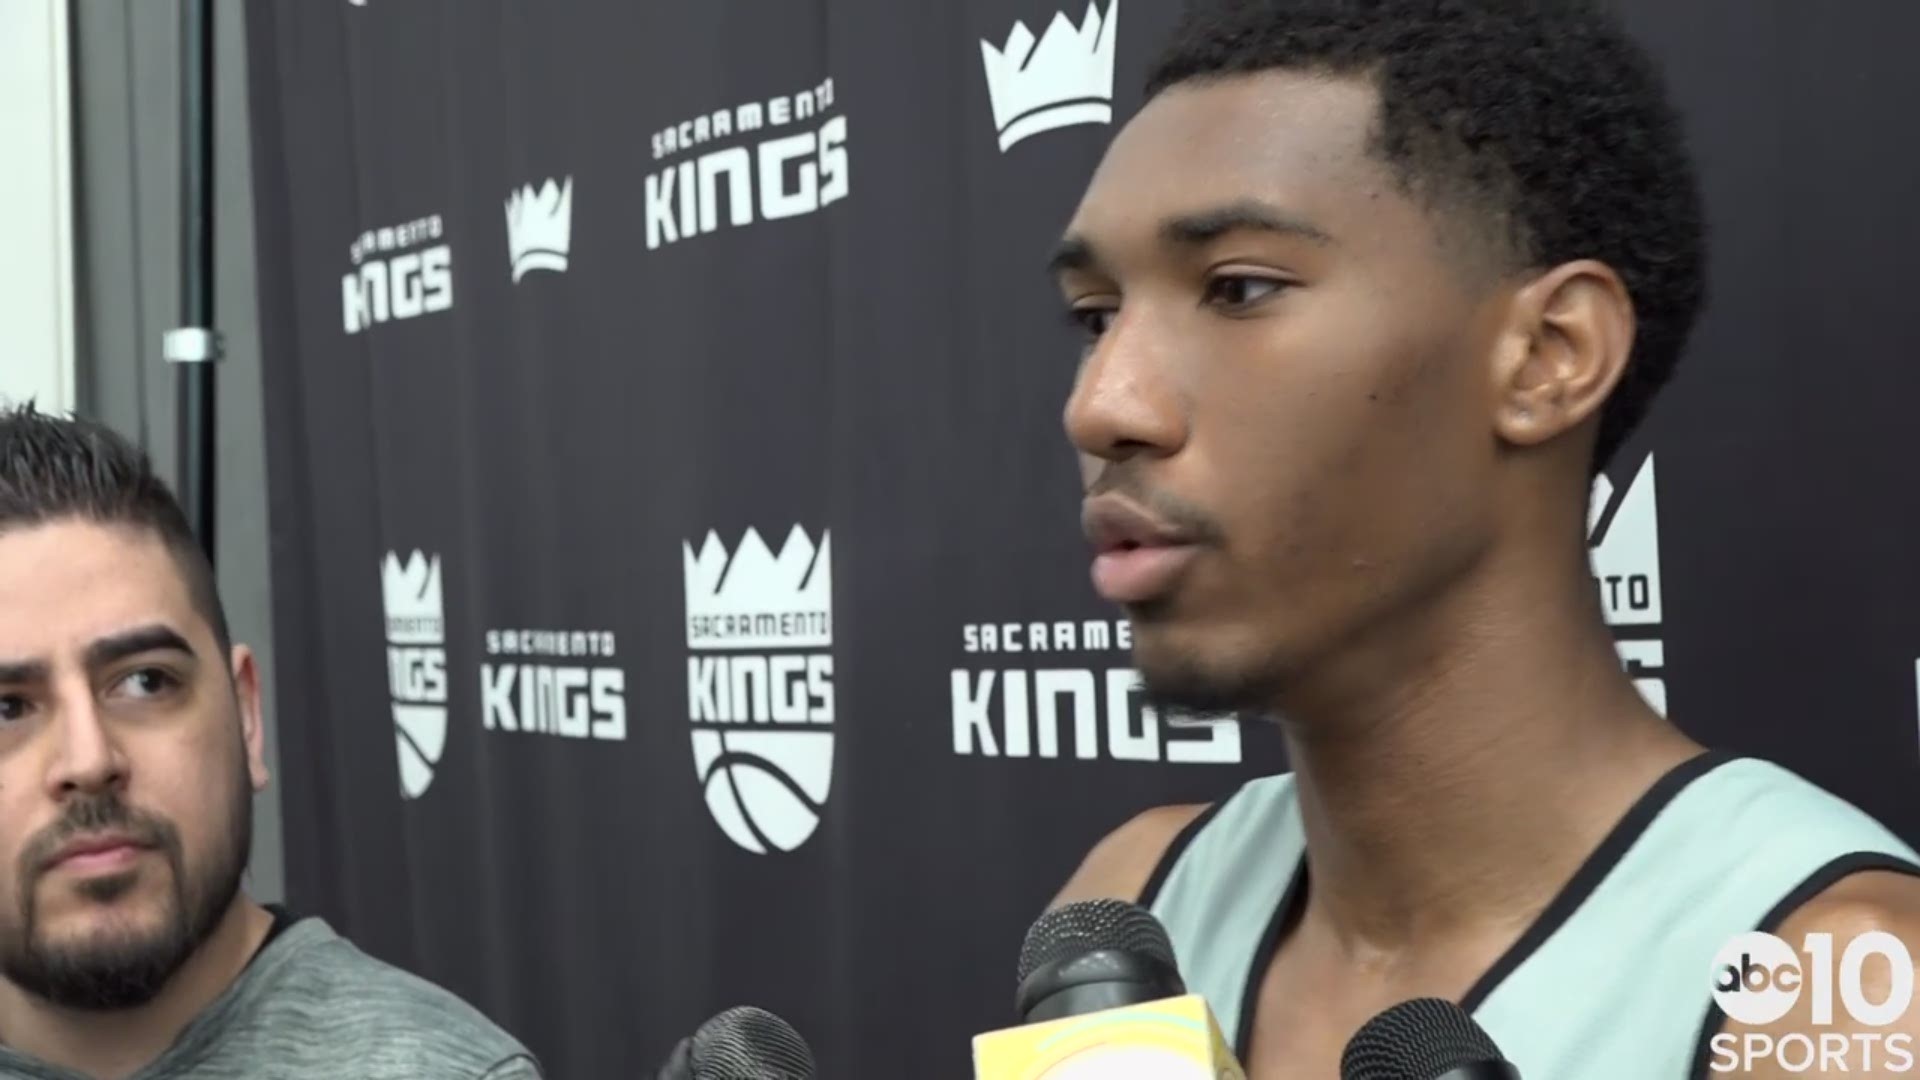 Houston guard Armoni Brooks discusses his pre-draft workout in Sacramento with the Kings on Monday, and also explains why he will be returning to college for his senior season, despite getting the experience of the draft process.